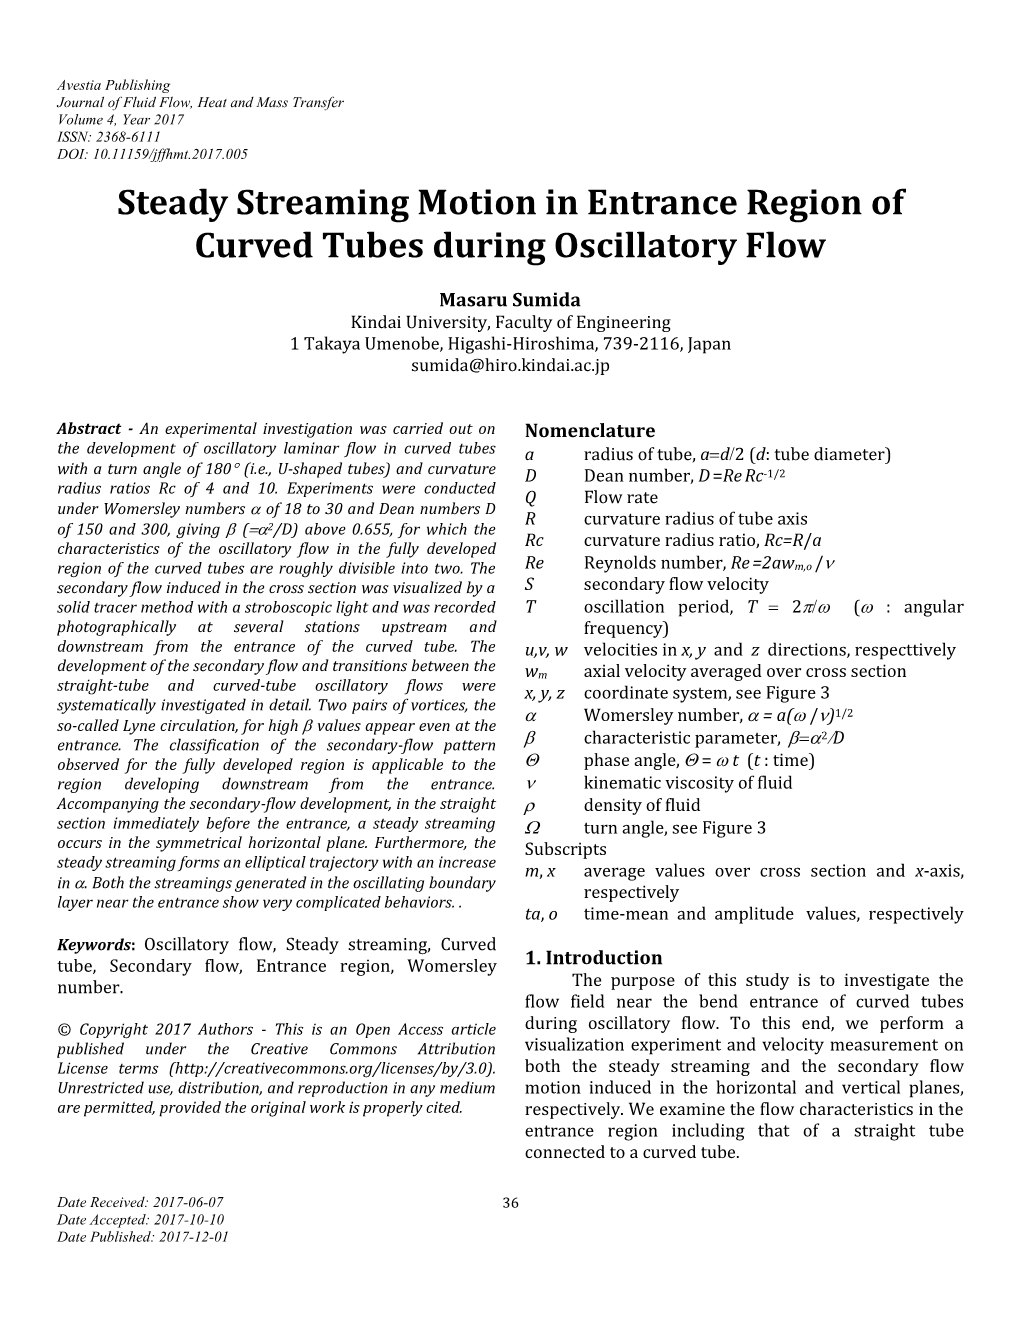 Steady Streaming Motion in Entrance Region of Curved Tubes During Oscillatory Flow